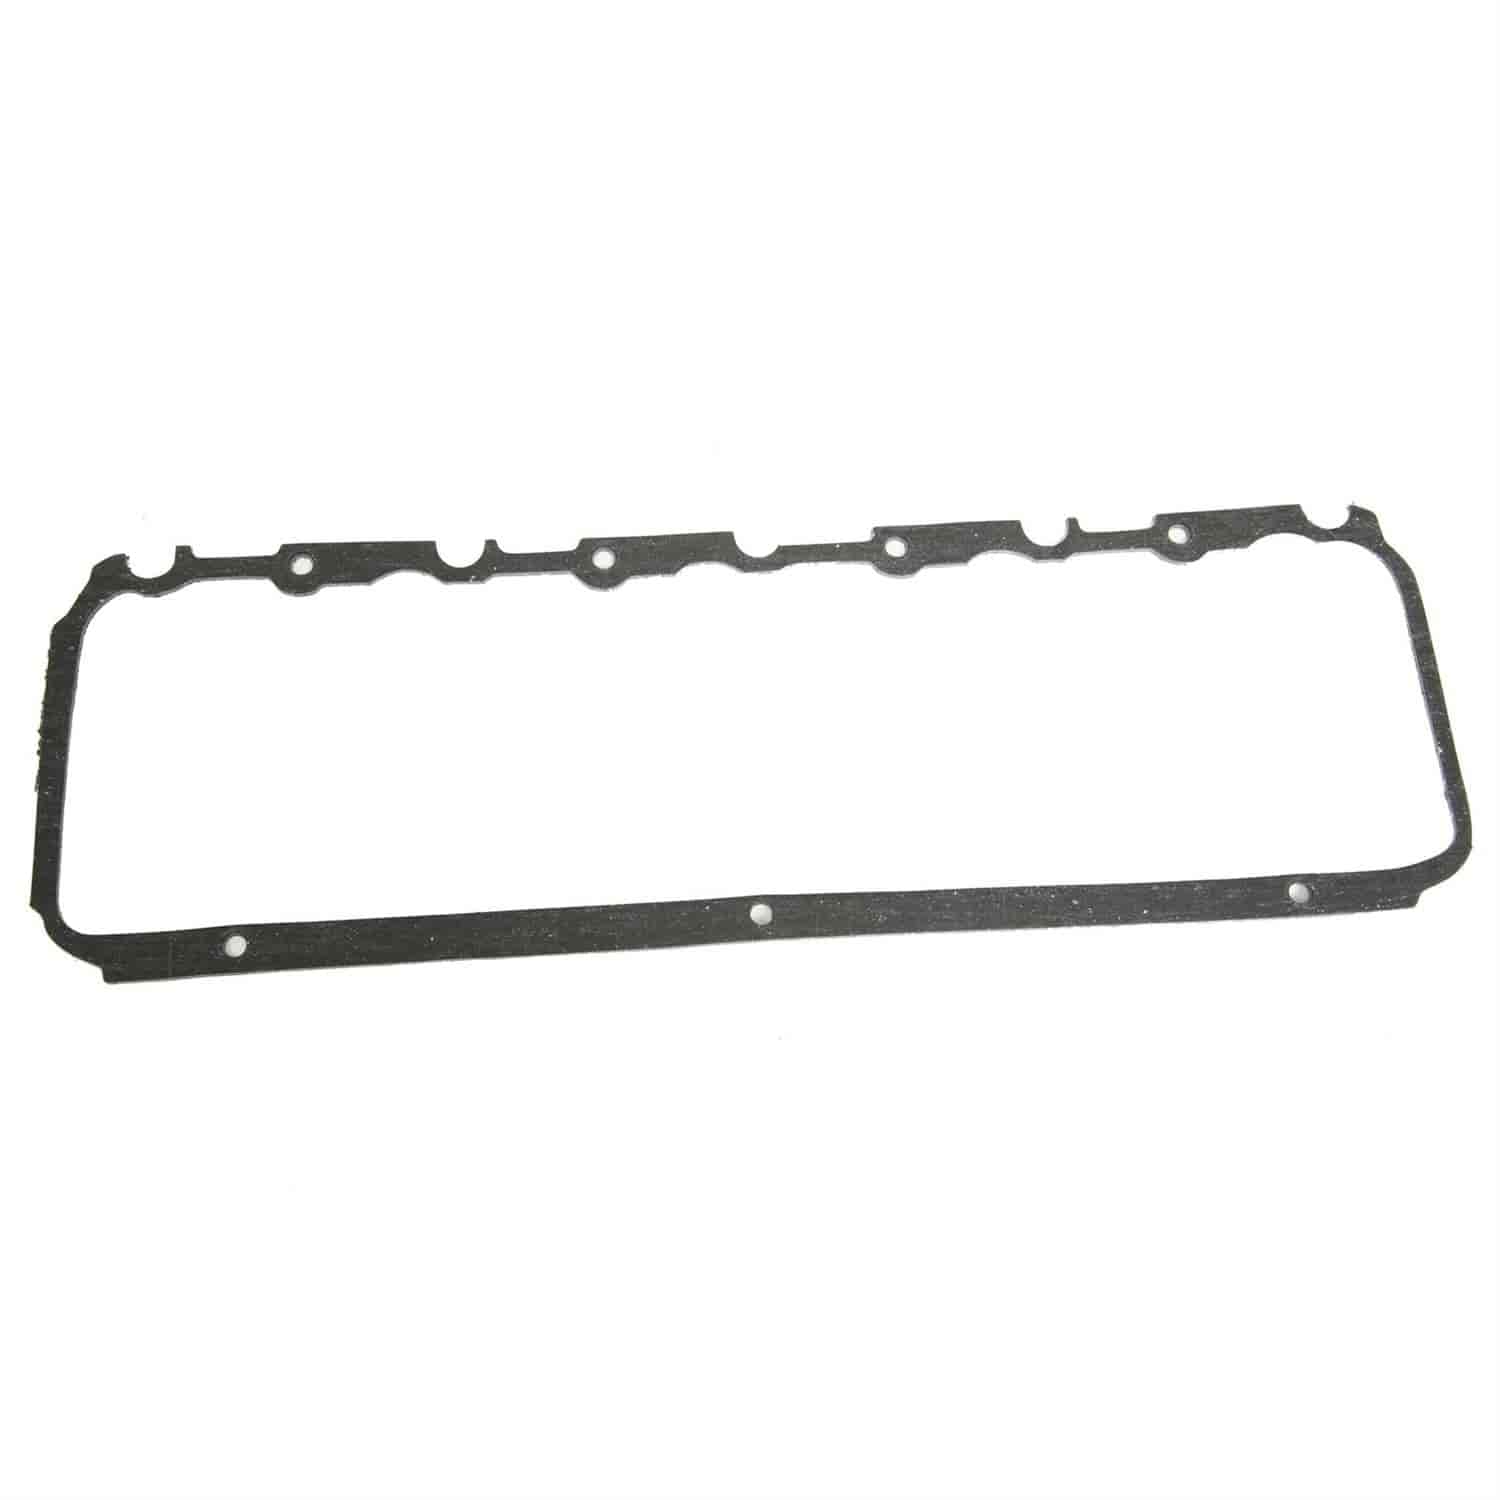 Valve Cover Gasket Big Block Chevy with Brodix PB2005 Heads